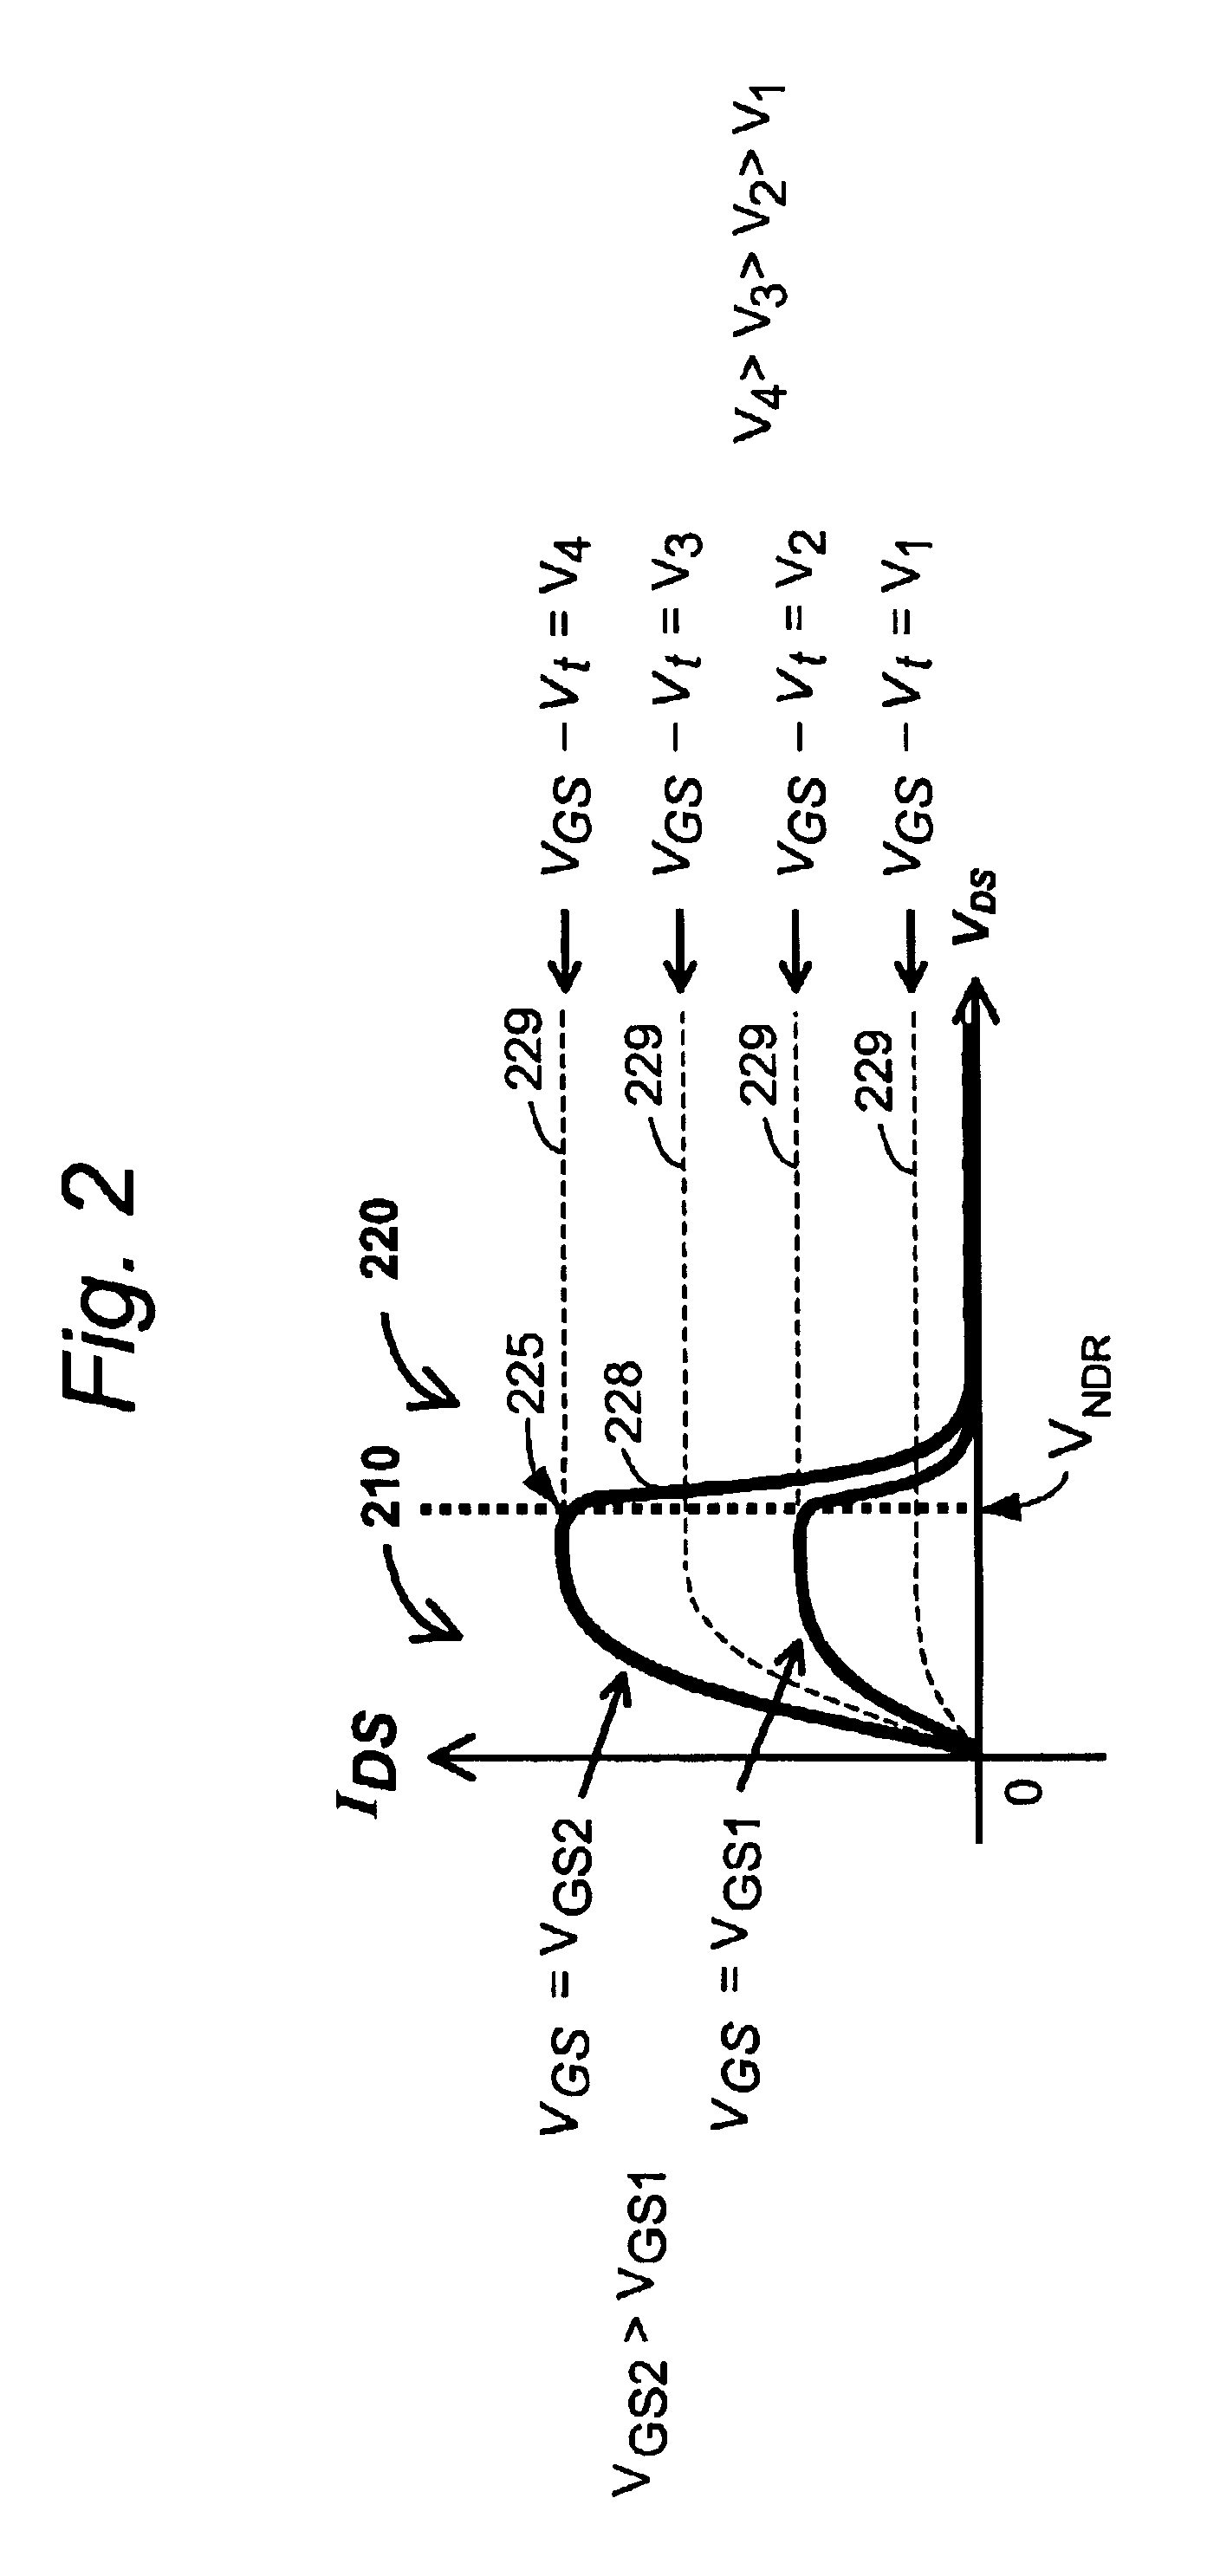 Process for controlling performance characteristics of a negative differential resistance (NDR) device